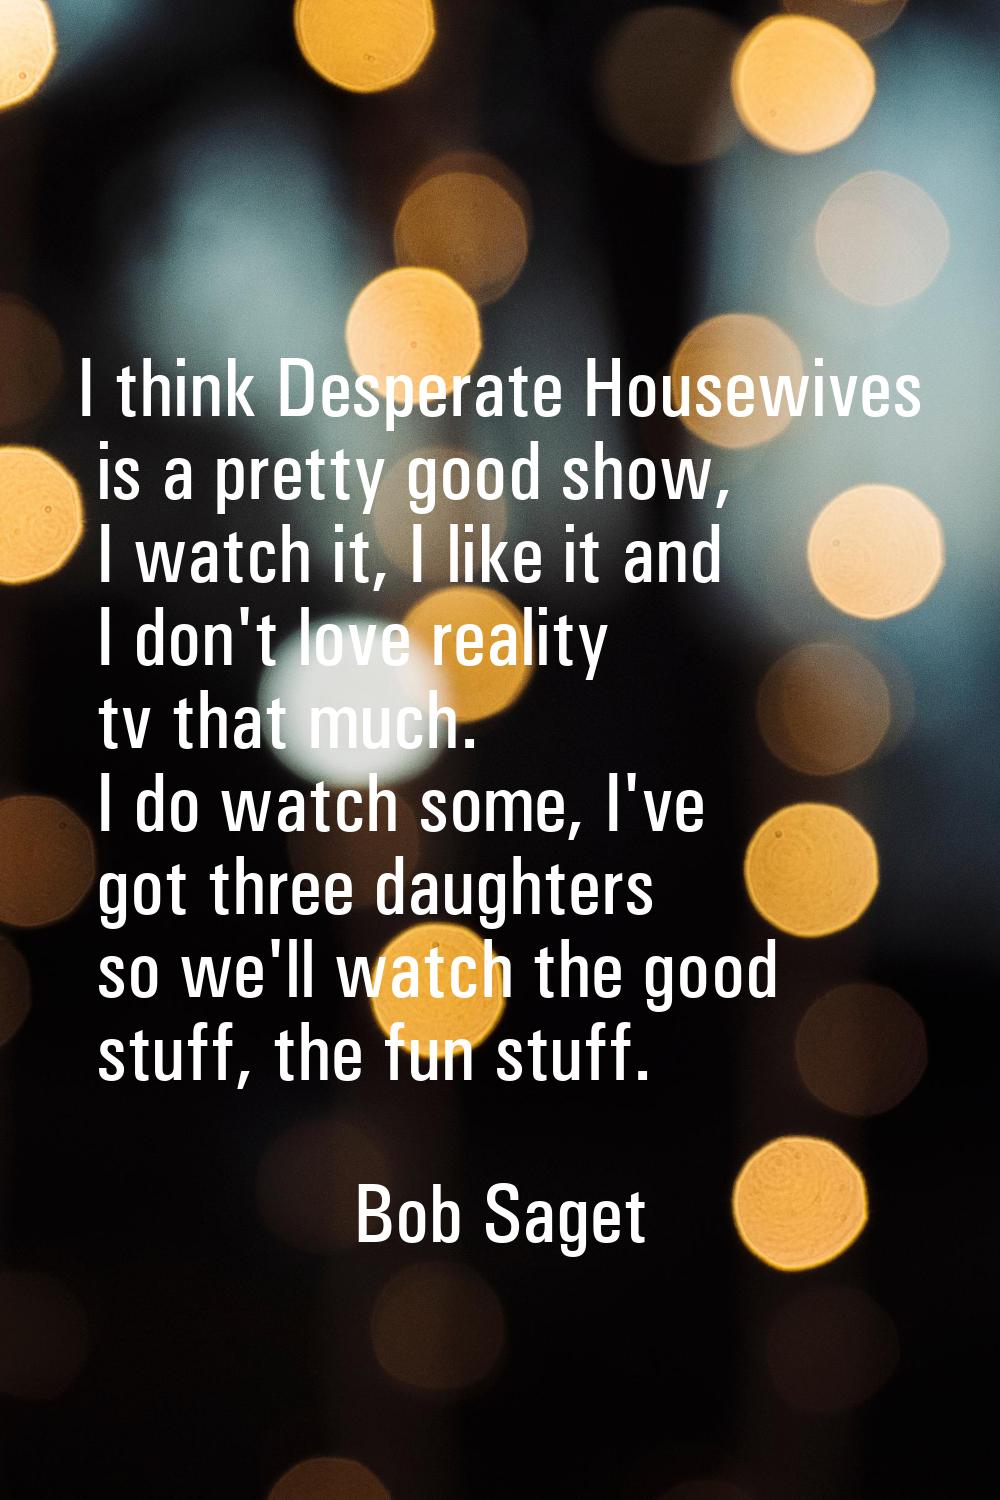 I think Desperate Housewives is a pretty good show, I watch it, I like it and I don't love reality 